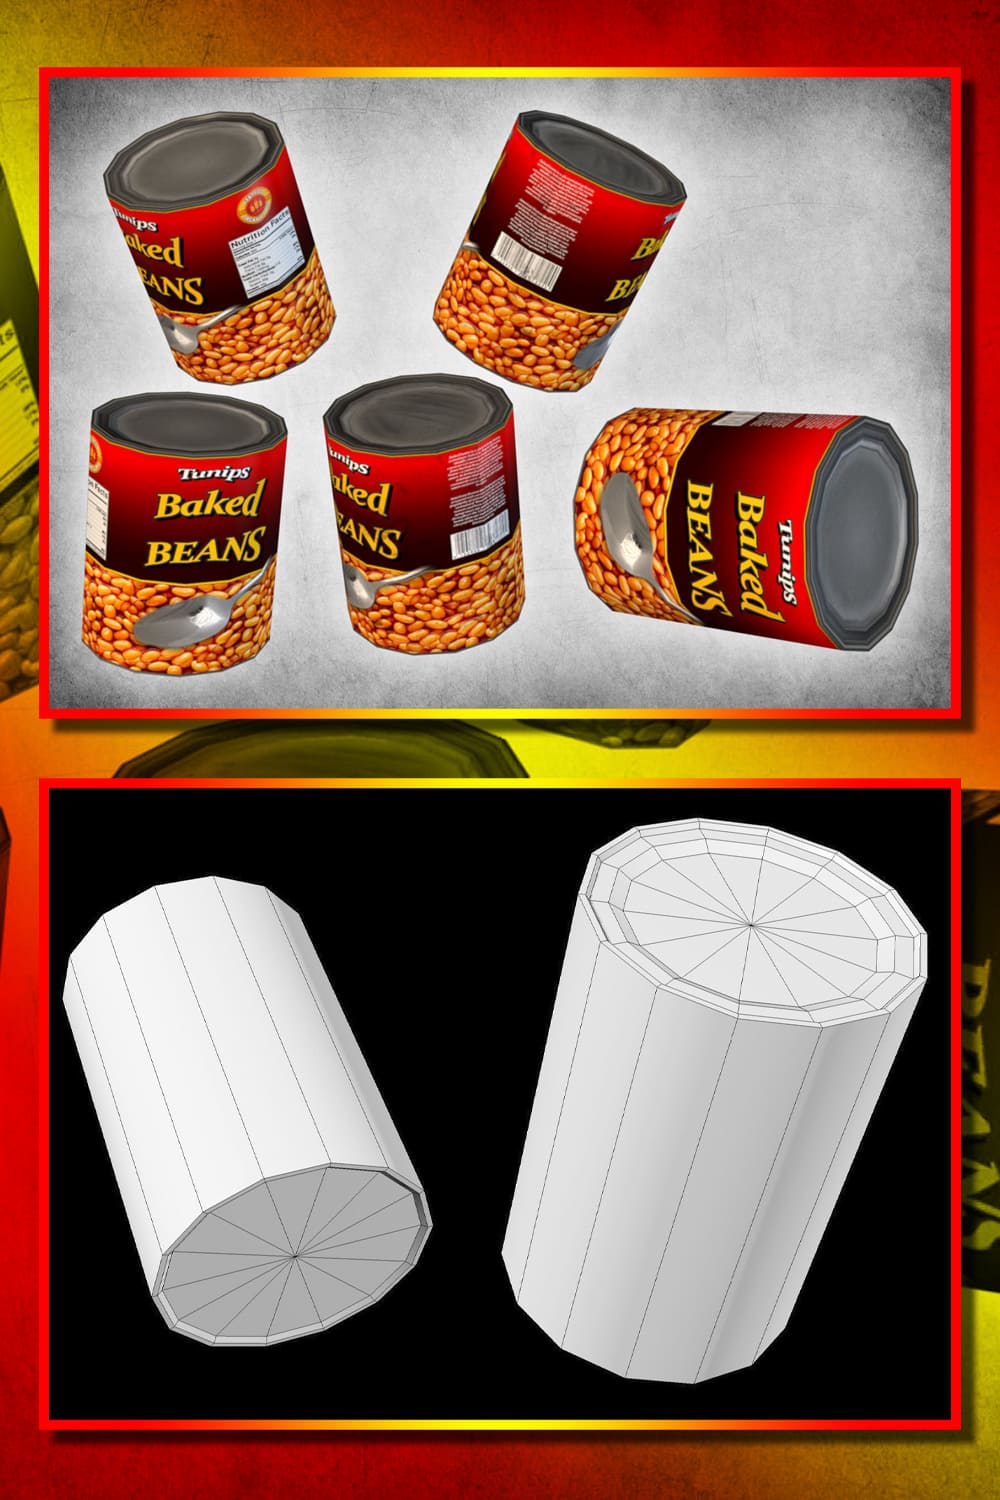 Two parallel 3D images with jars for baked beans.